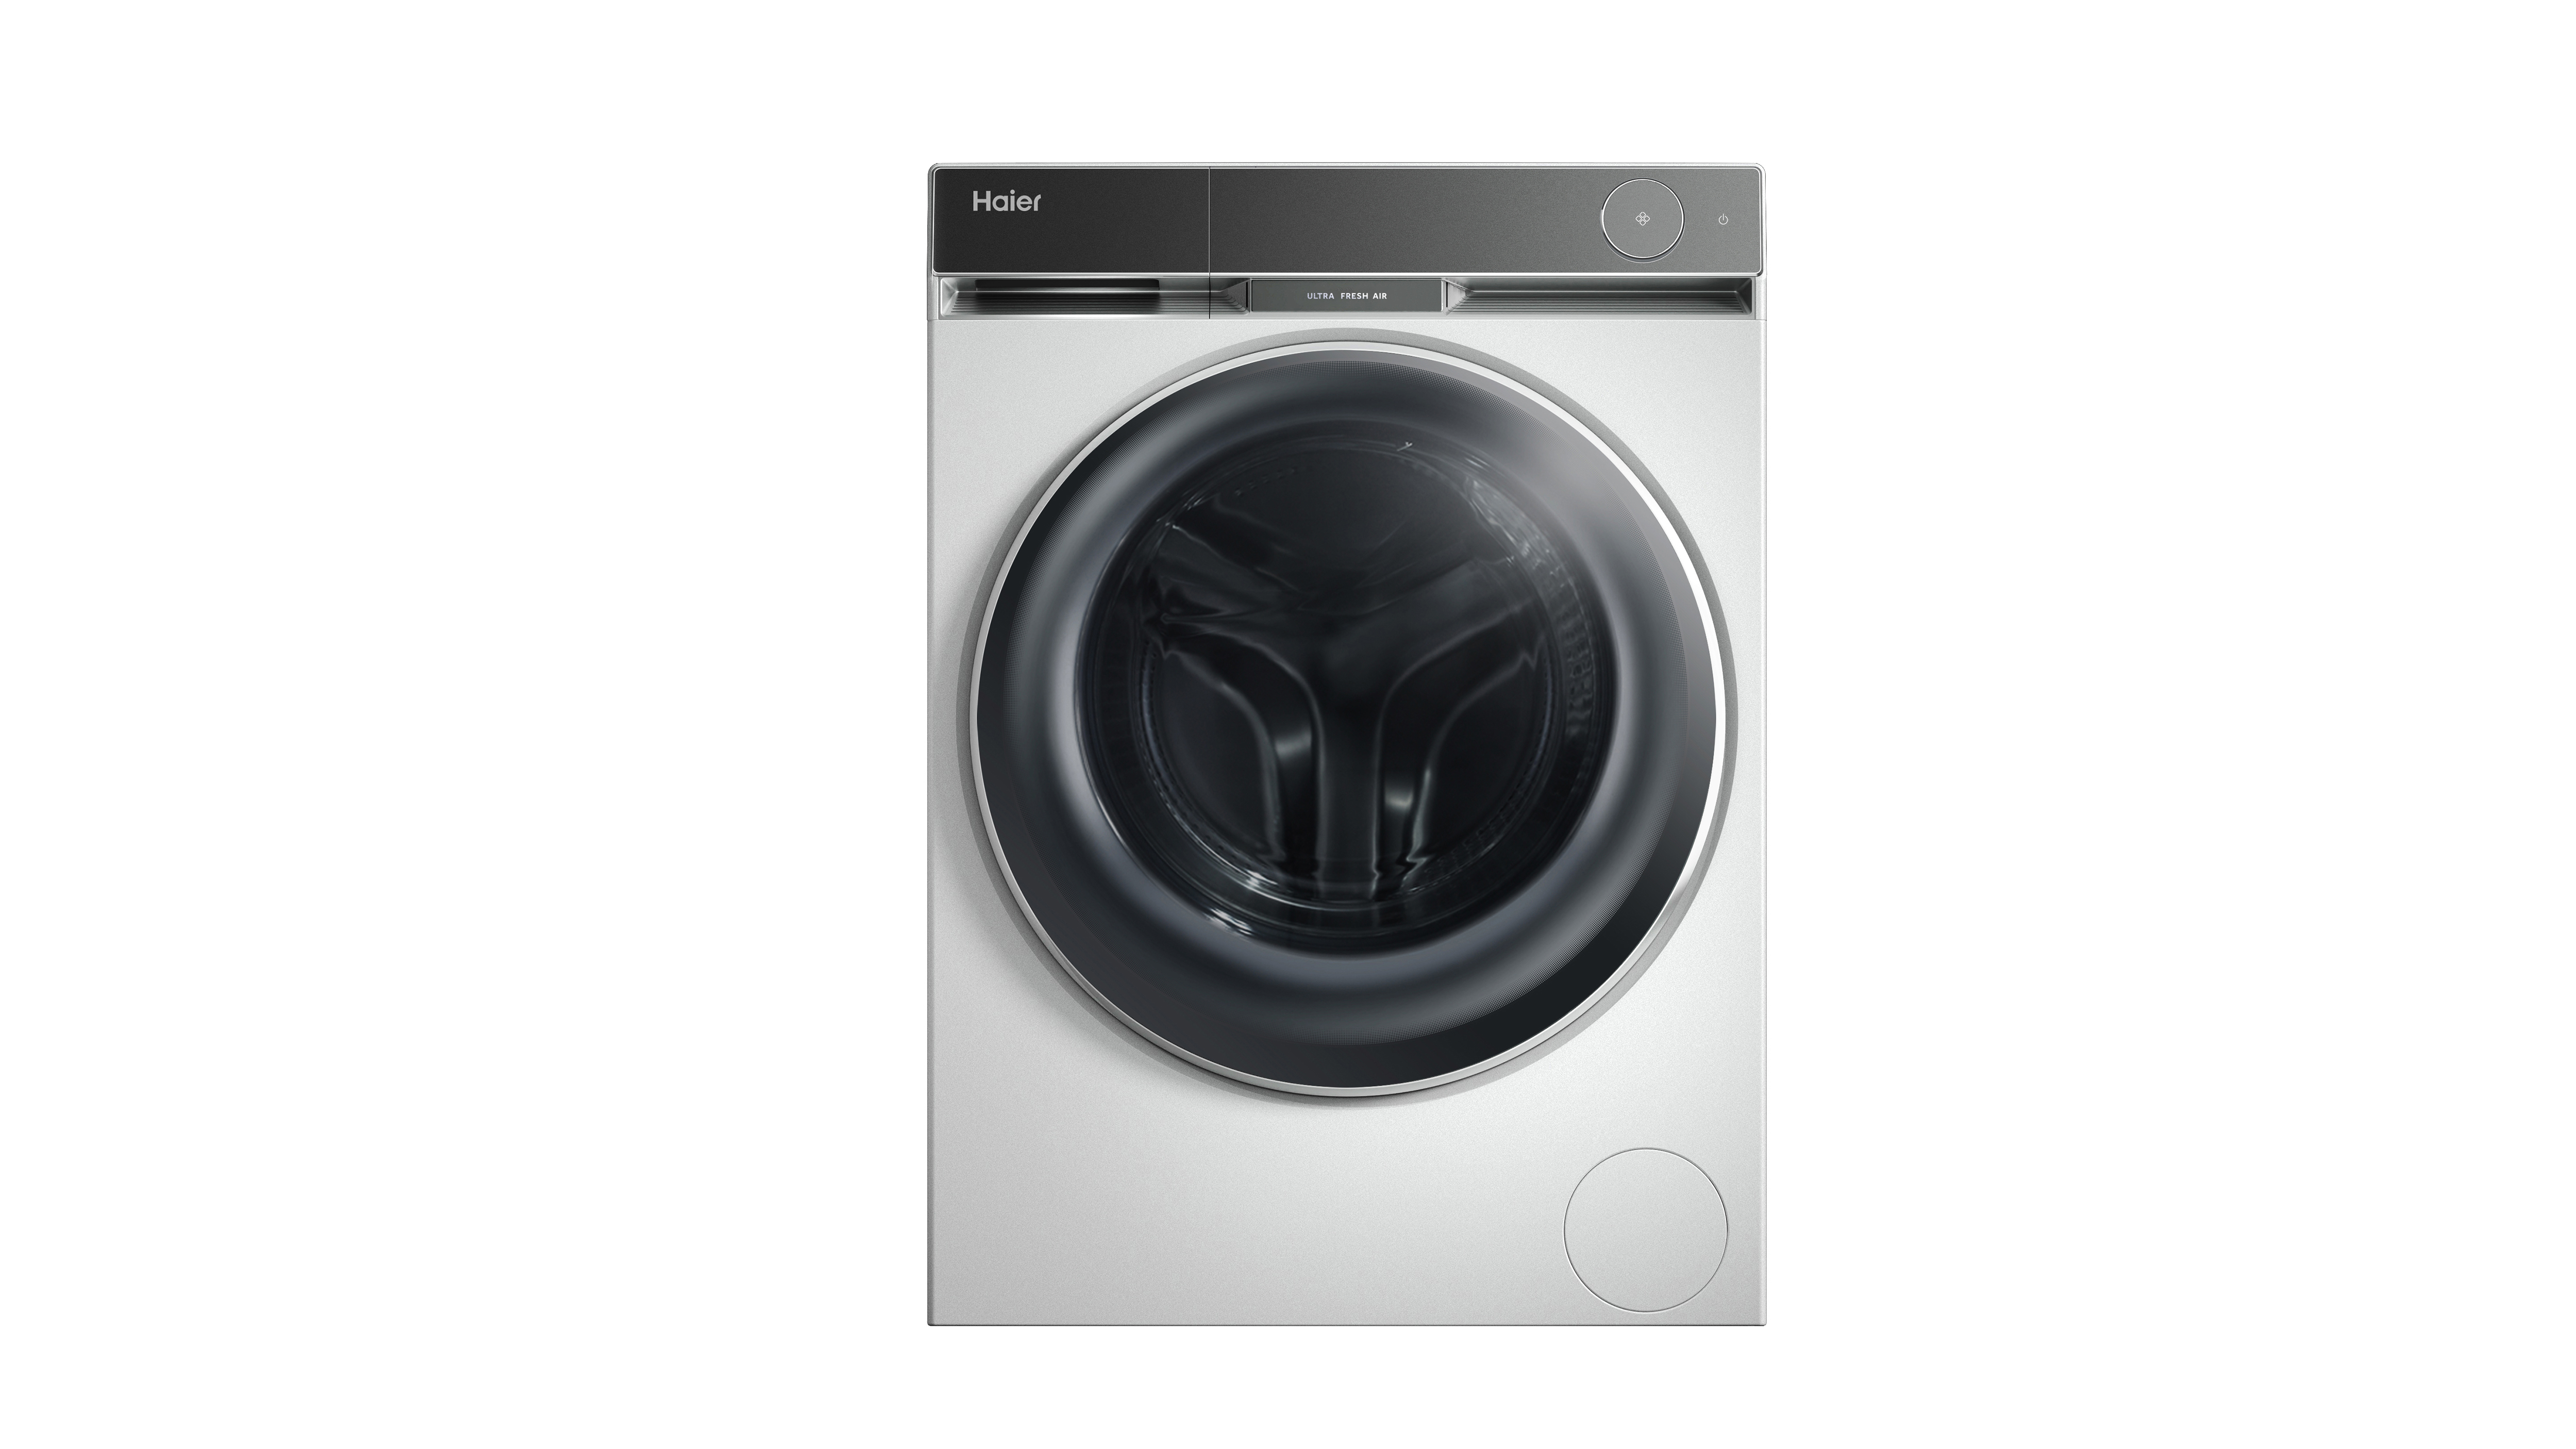 Haier X Series11 Washer and Dryer Set